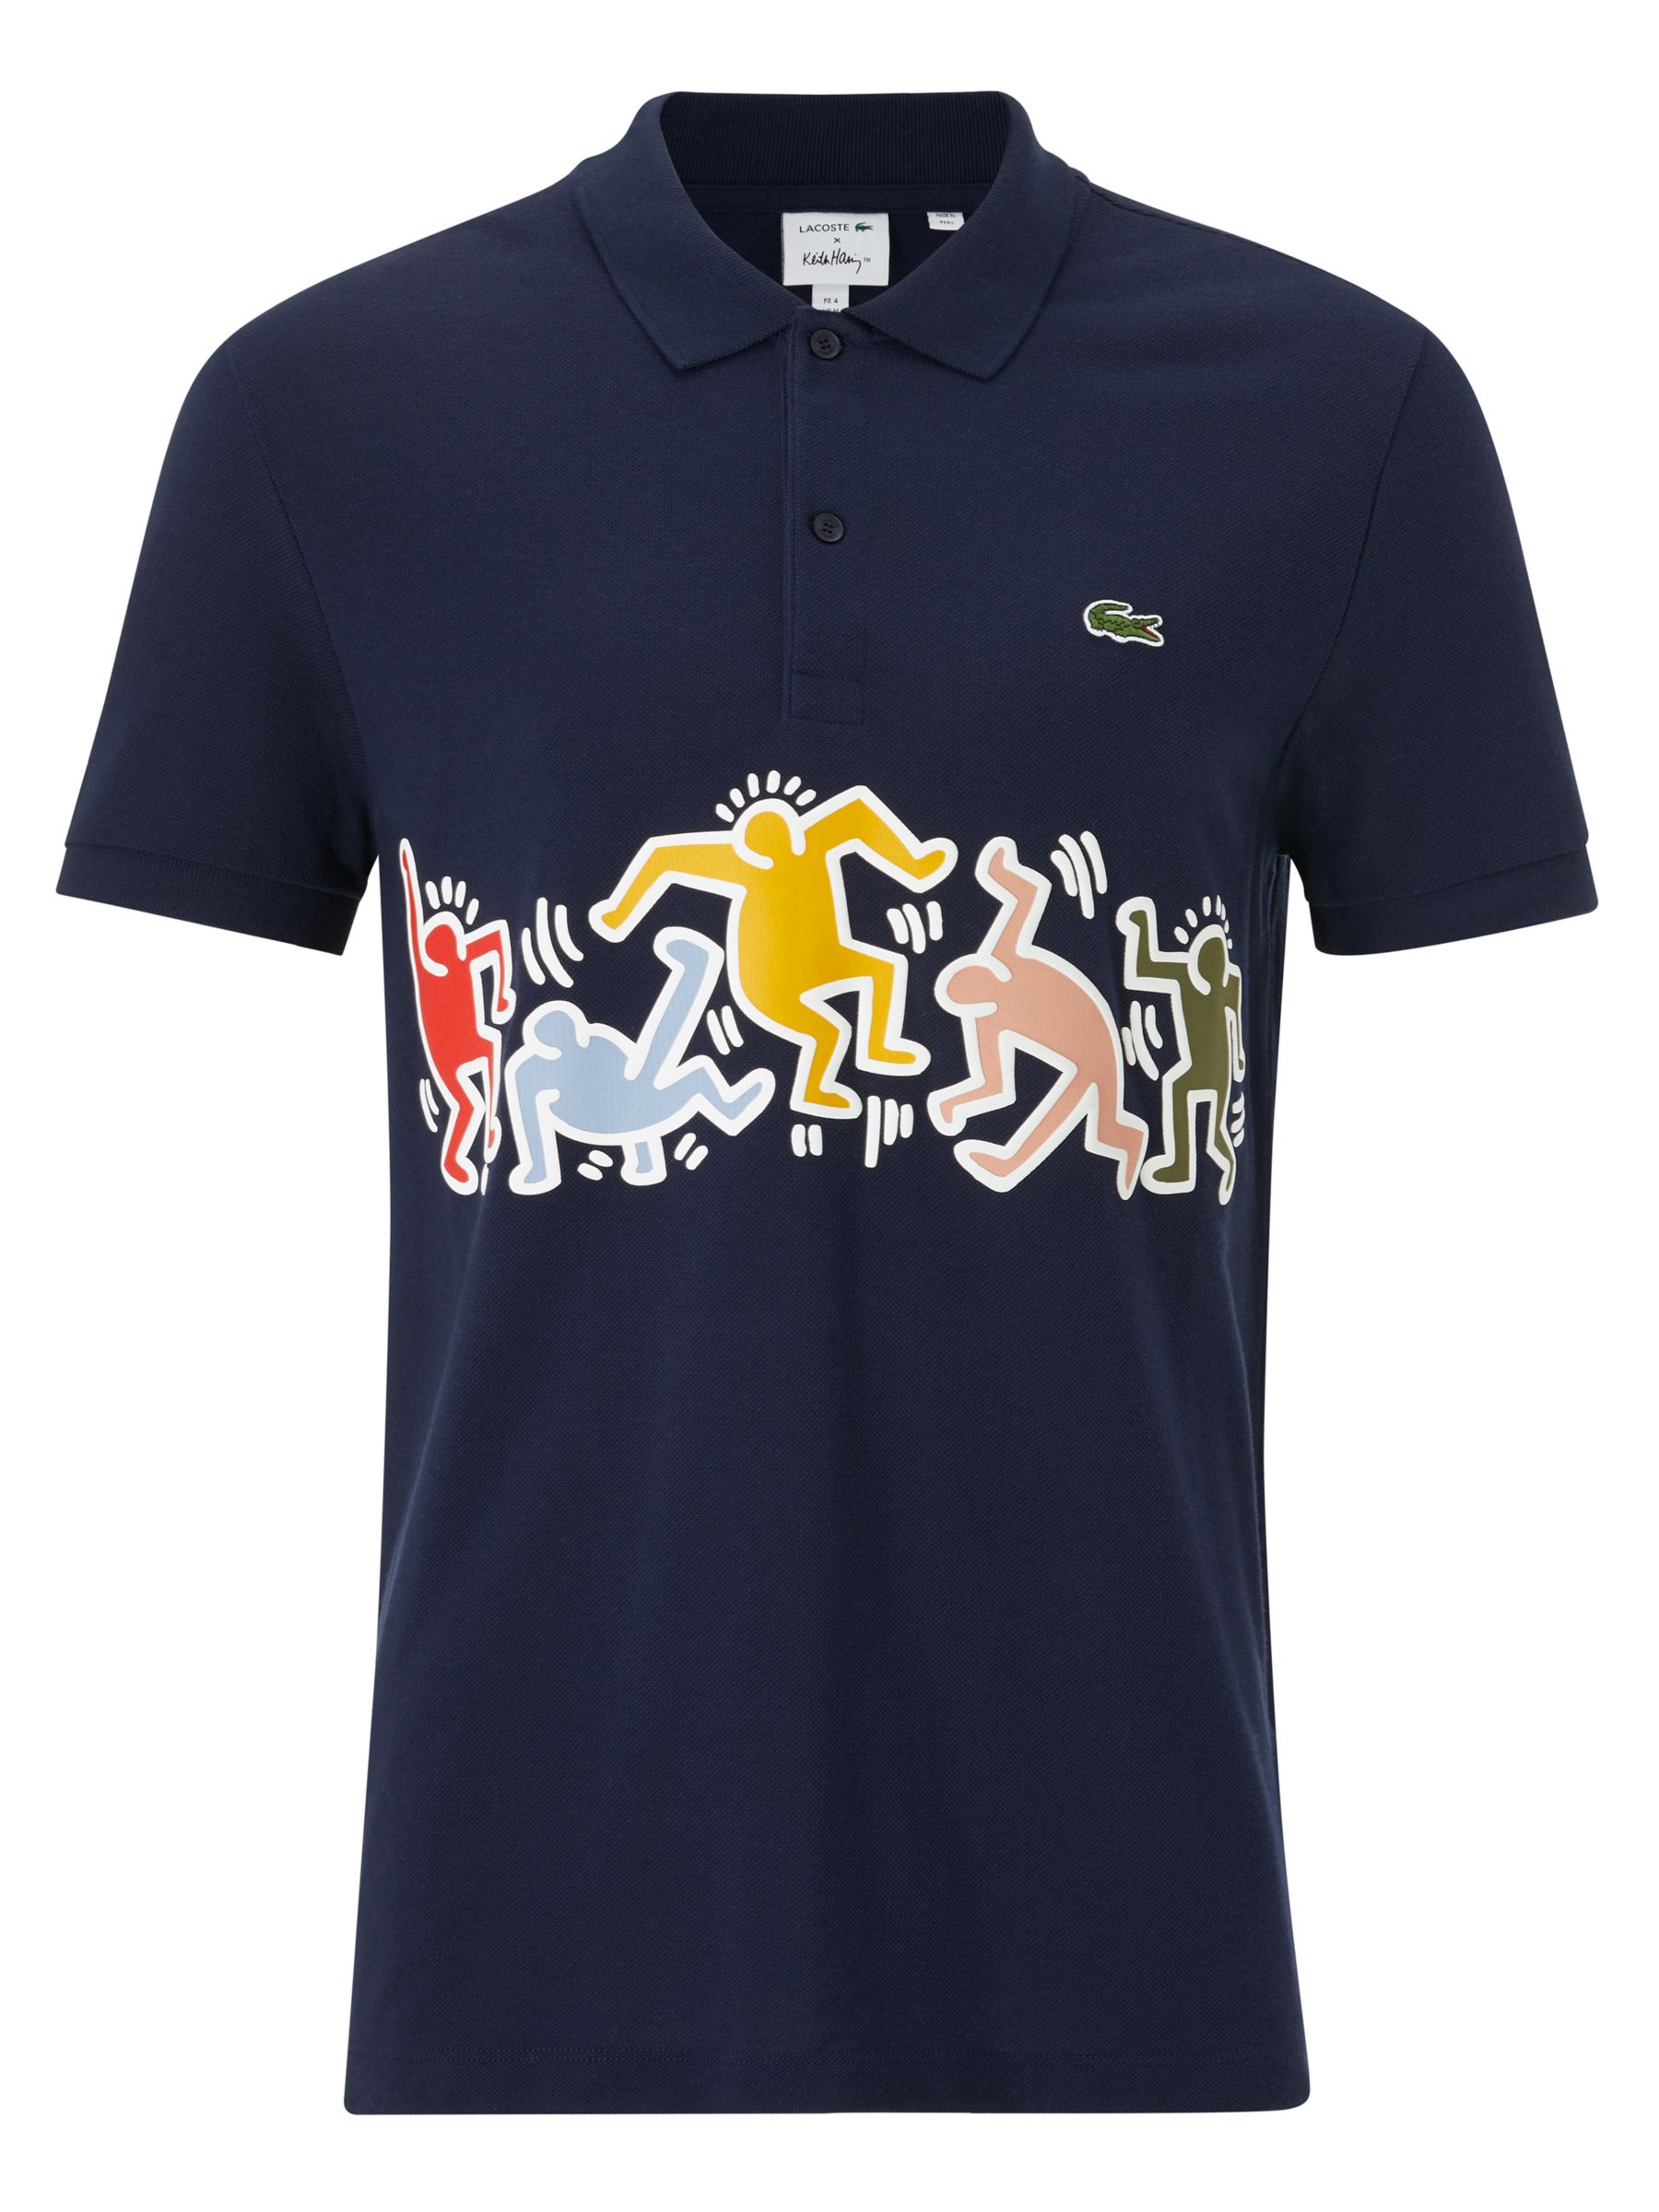 lacoste keith haring uk